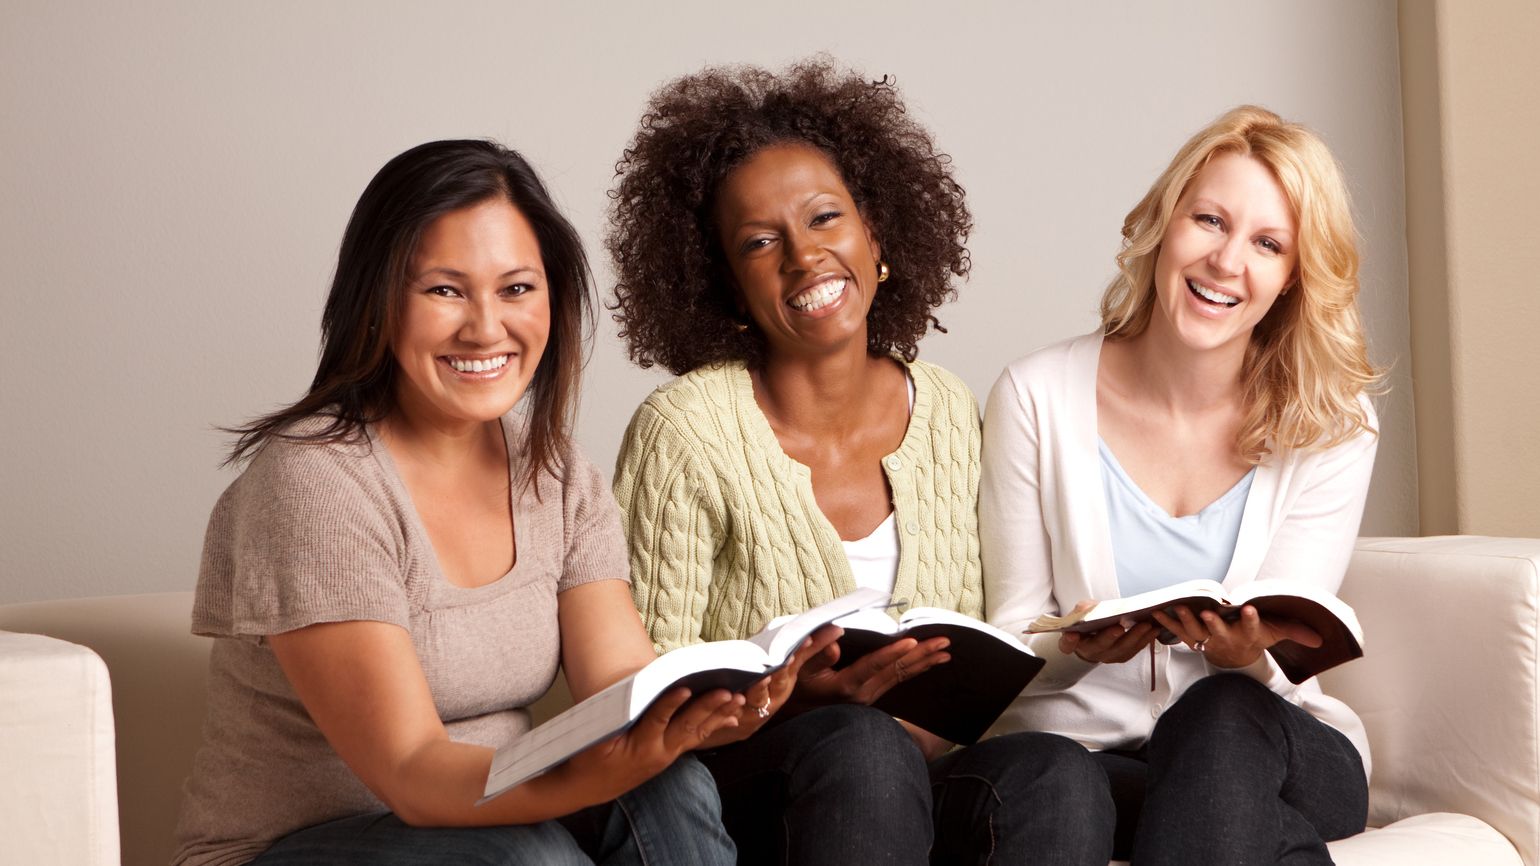 A New Look at the Powerful Women of the Bible Guideposts